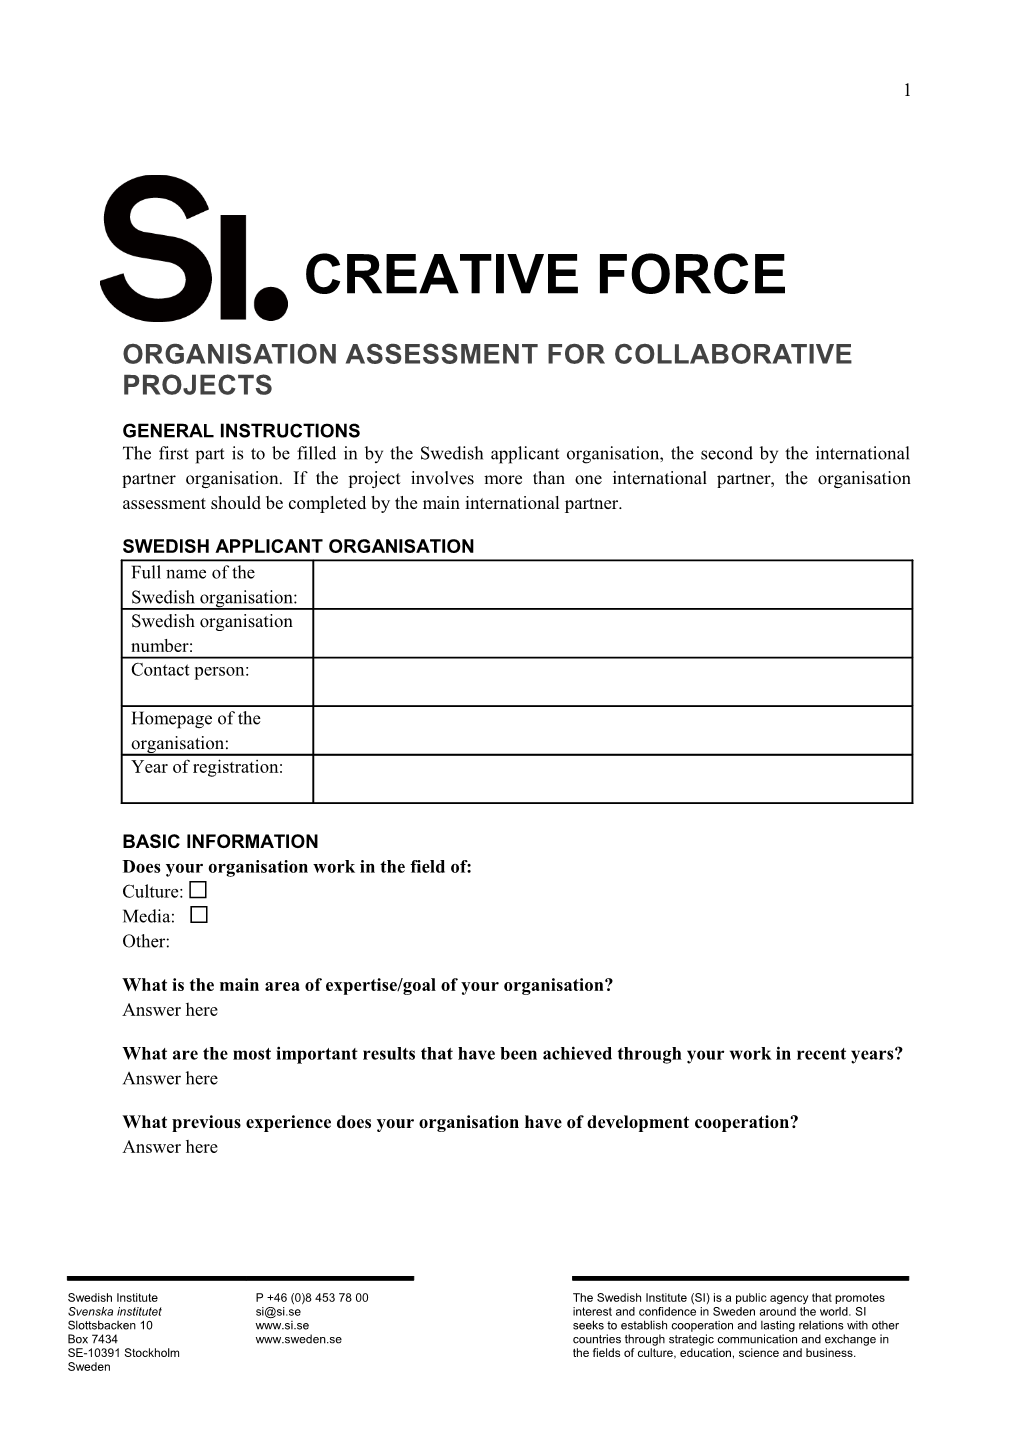 Organisation Assessment for Collaborative Projects